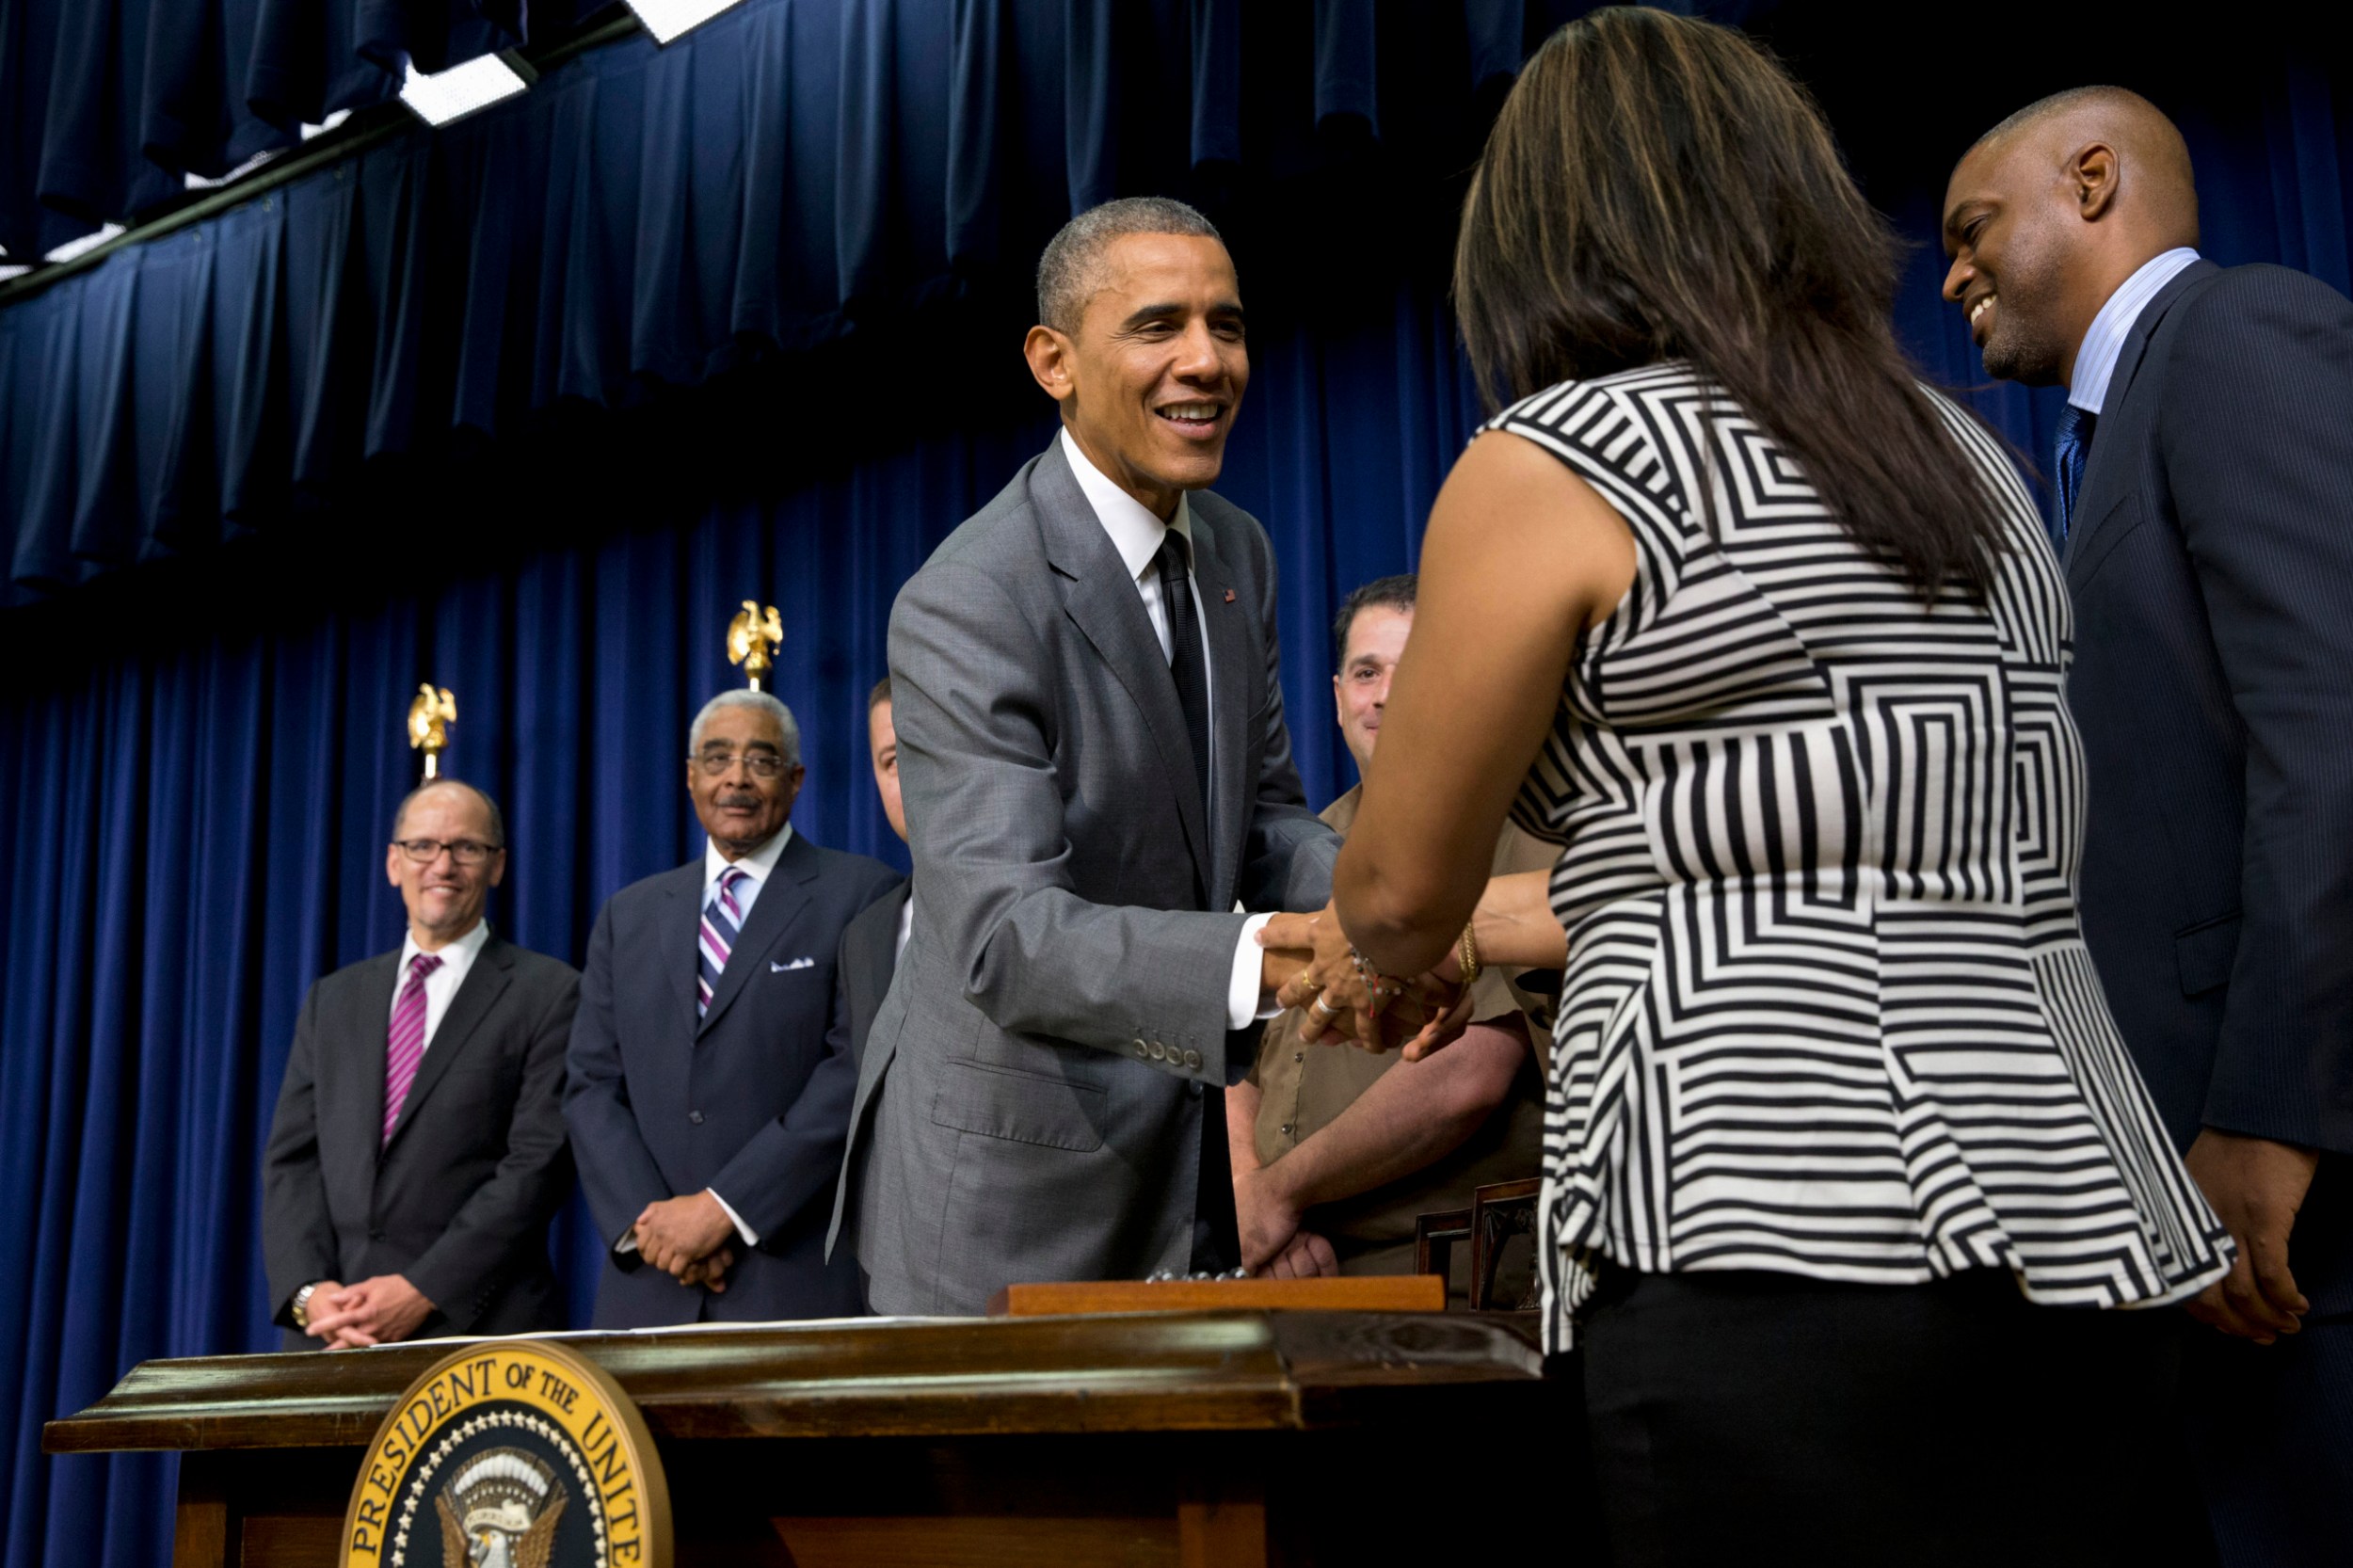 President Barack Obama shakes hands with workers and advocates after signing the Fair Pay and Safe Workplaces executive order on July 31, 2014. (AP/Jacquelyn Martin)